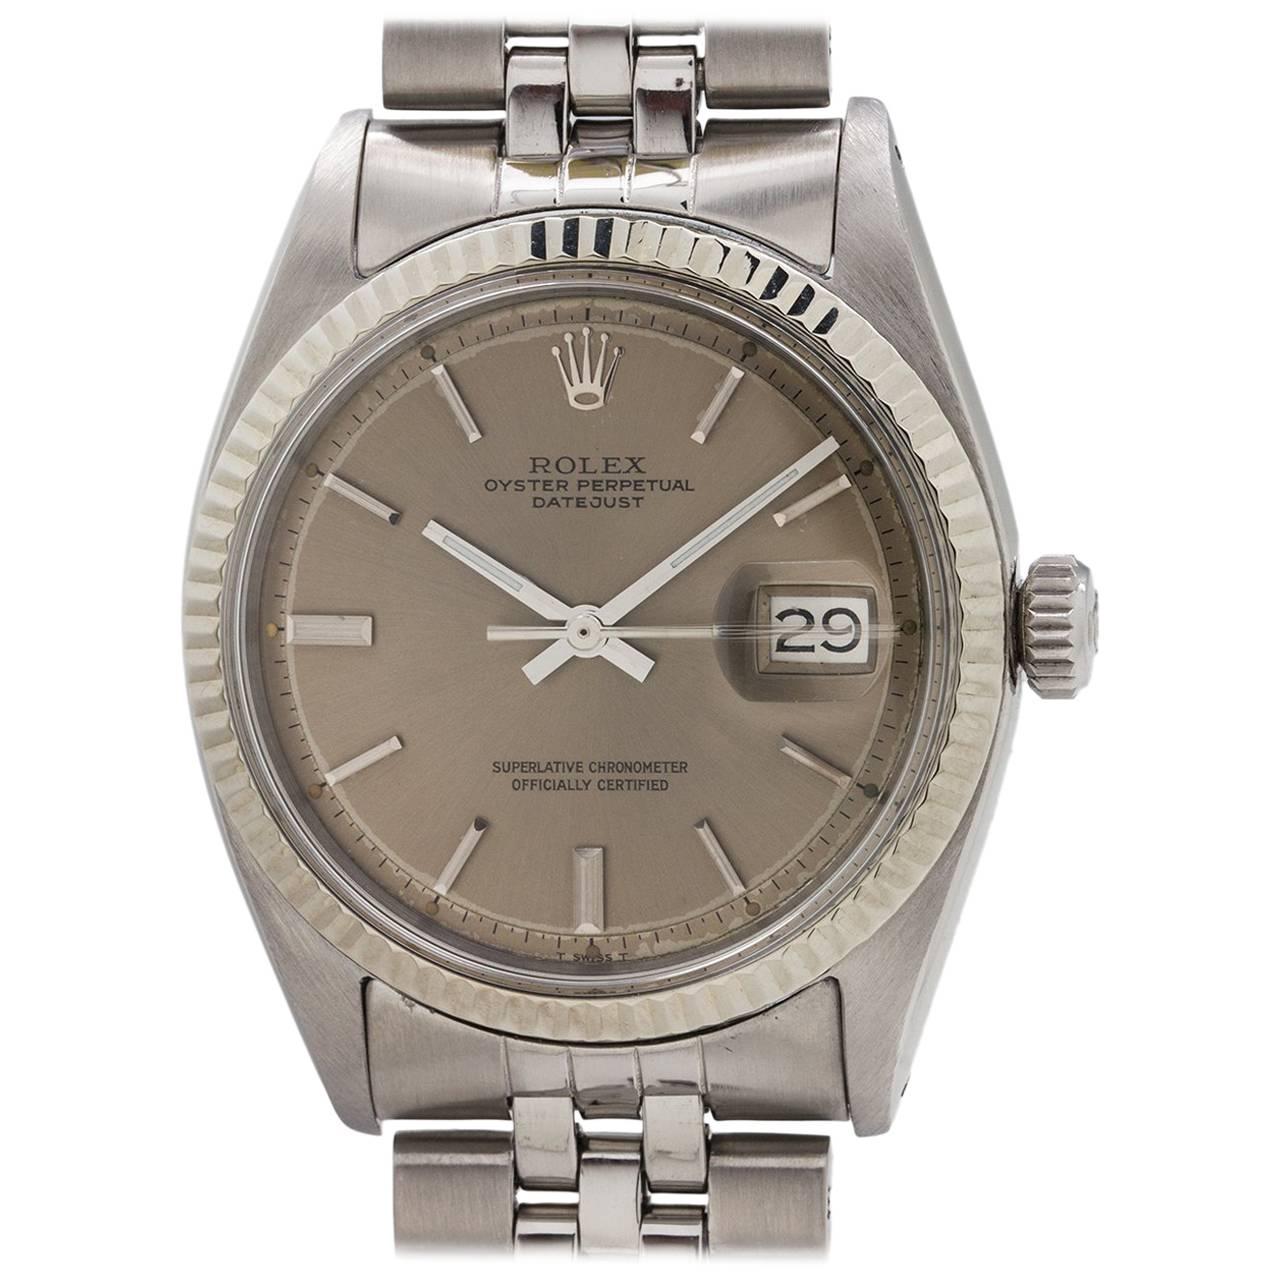 Rolex Stainless Steel & White Gold Datejust Automatic Wristwatch, circa 1968